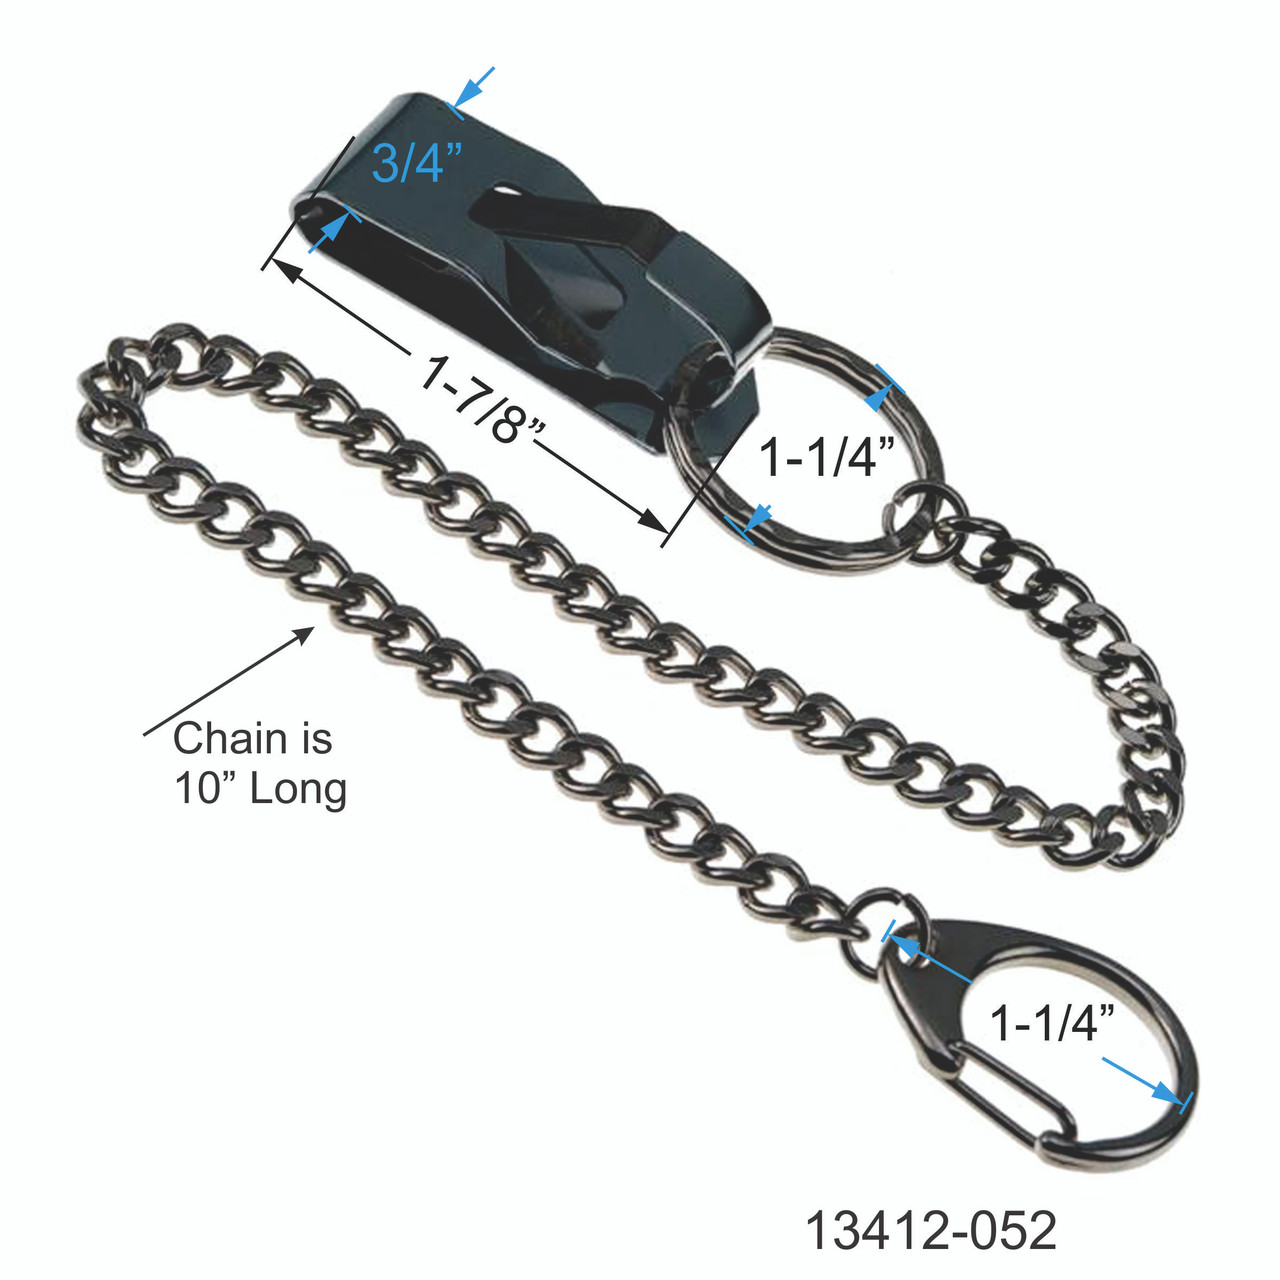 All-in-One Accessory: Chain Strap Extender, Key Fob Tether, Key Chain –  Mautto